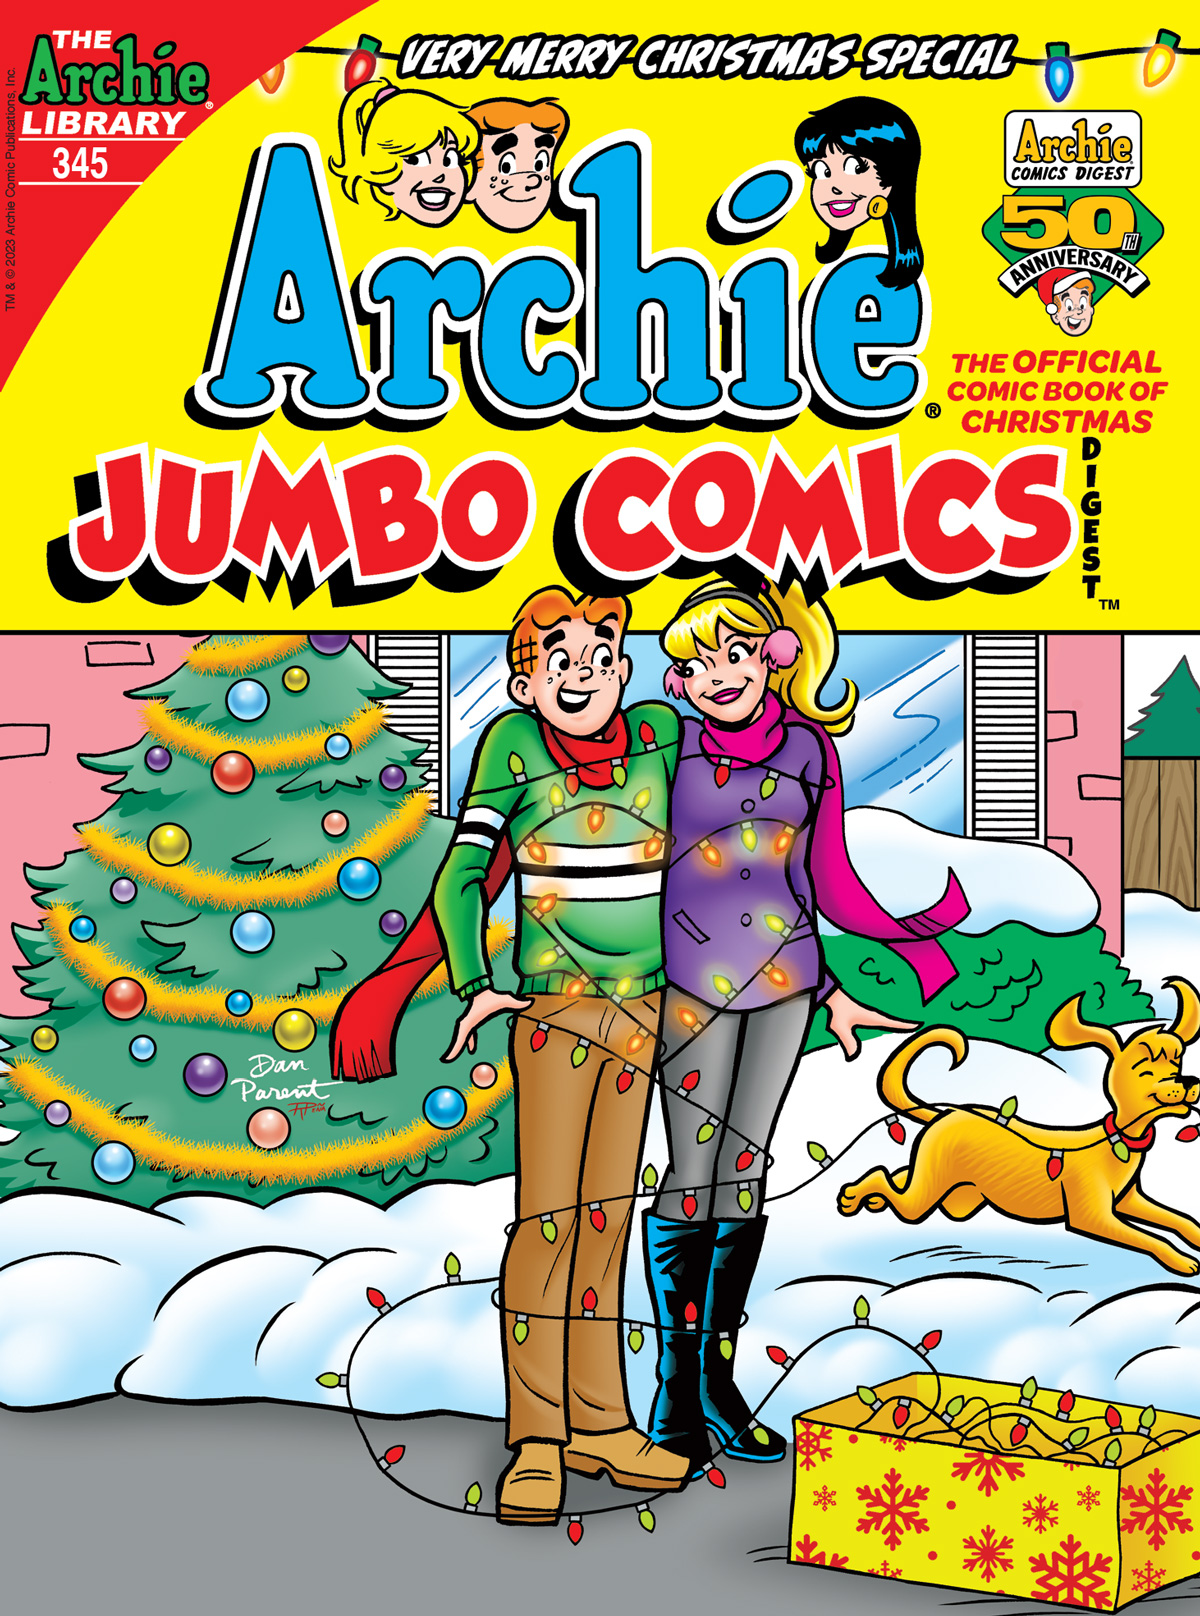 Cover of ARCHIE DIGEST #345. Betty and Veronica stand outside in the snow at Christmas time. Vegas the dog has just tied them together with a string of Christmas lights.